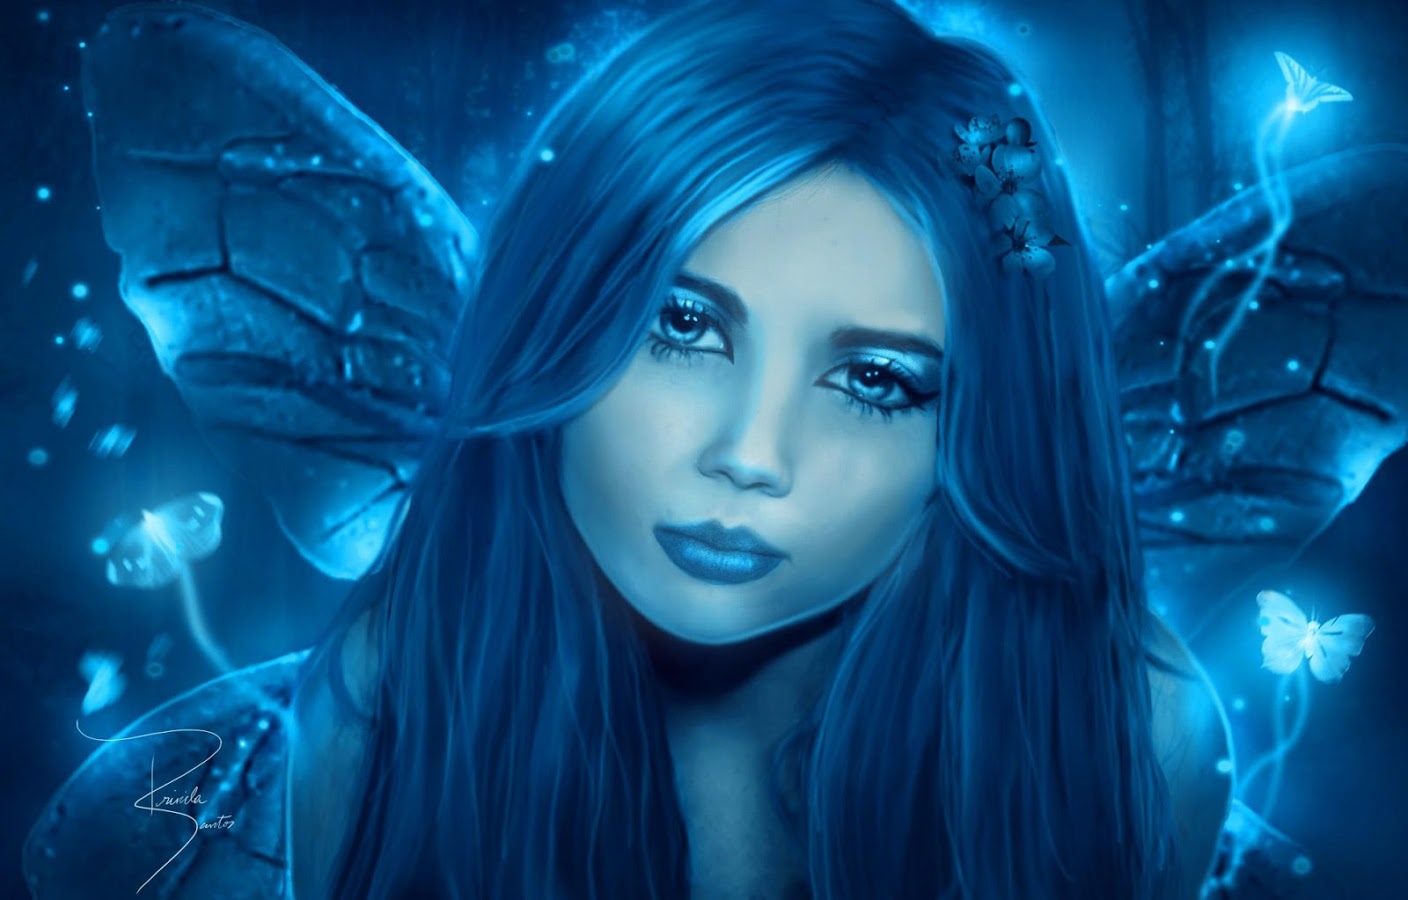 Blue Fairy Live Wallpaper - Android Apps on Google Play